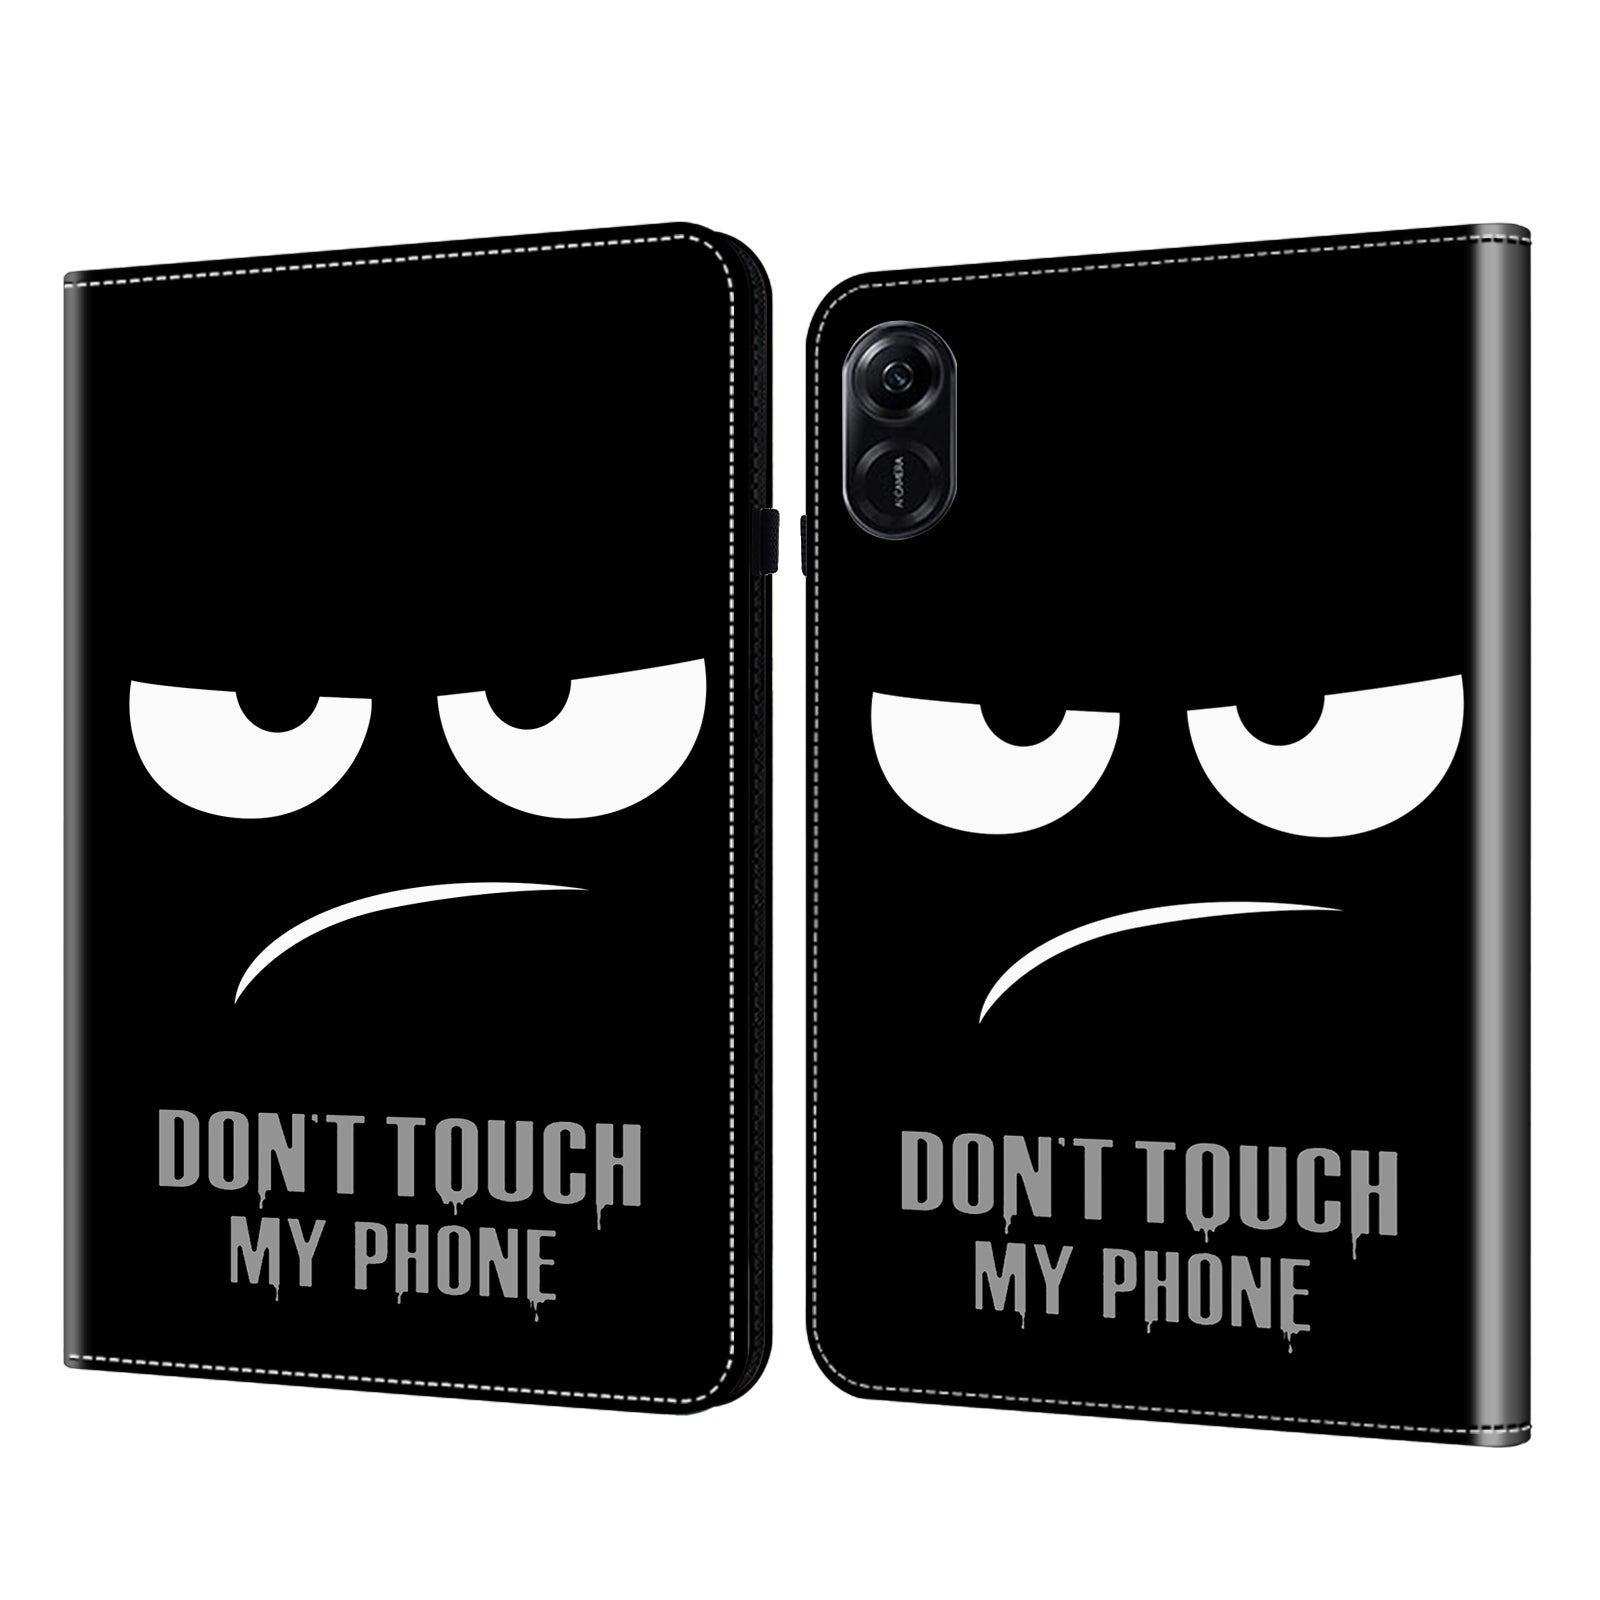 For Honor Pad X9 Case PU Leather Folio Stand Pattern Printing Tablet Cover - Don't Touch My Phone